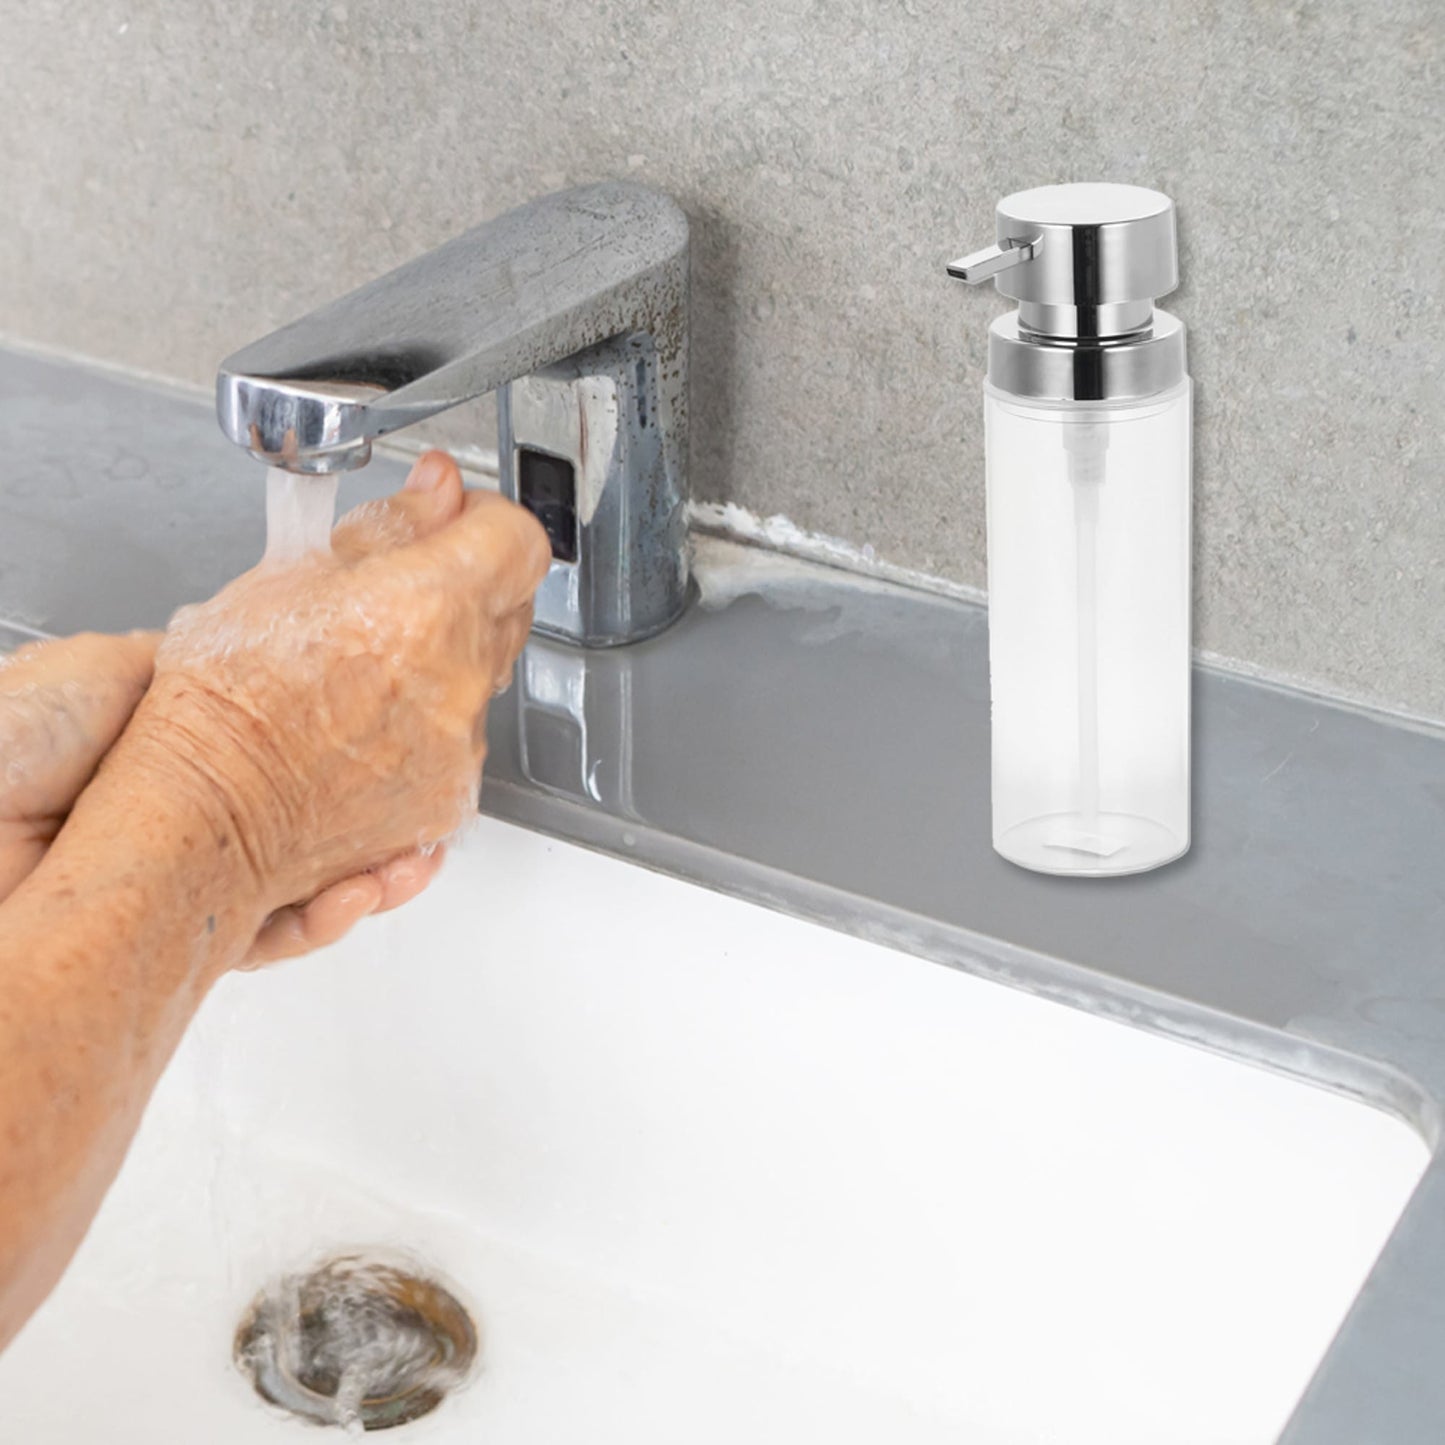 12 oz.  Cylinder Plastic Hand Soap Dispenser with Brushed Stainless Steel Pump, Clear